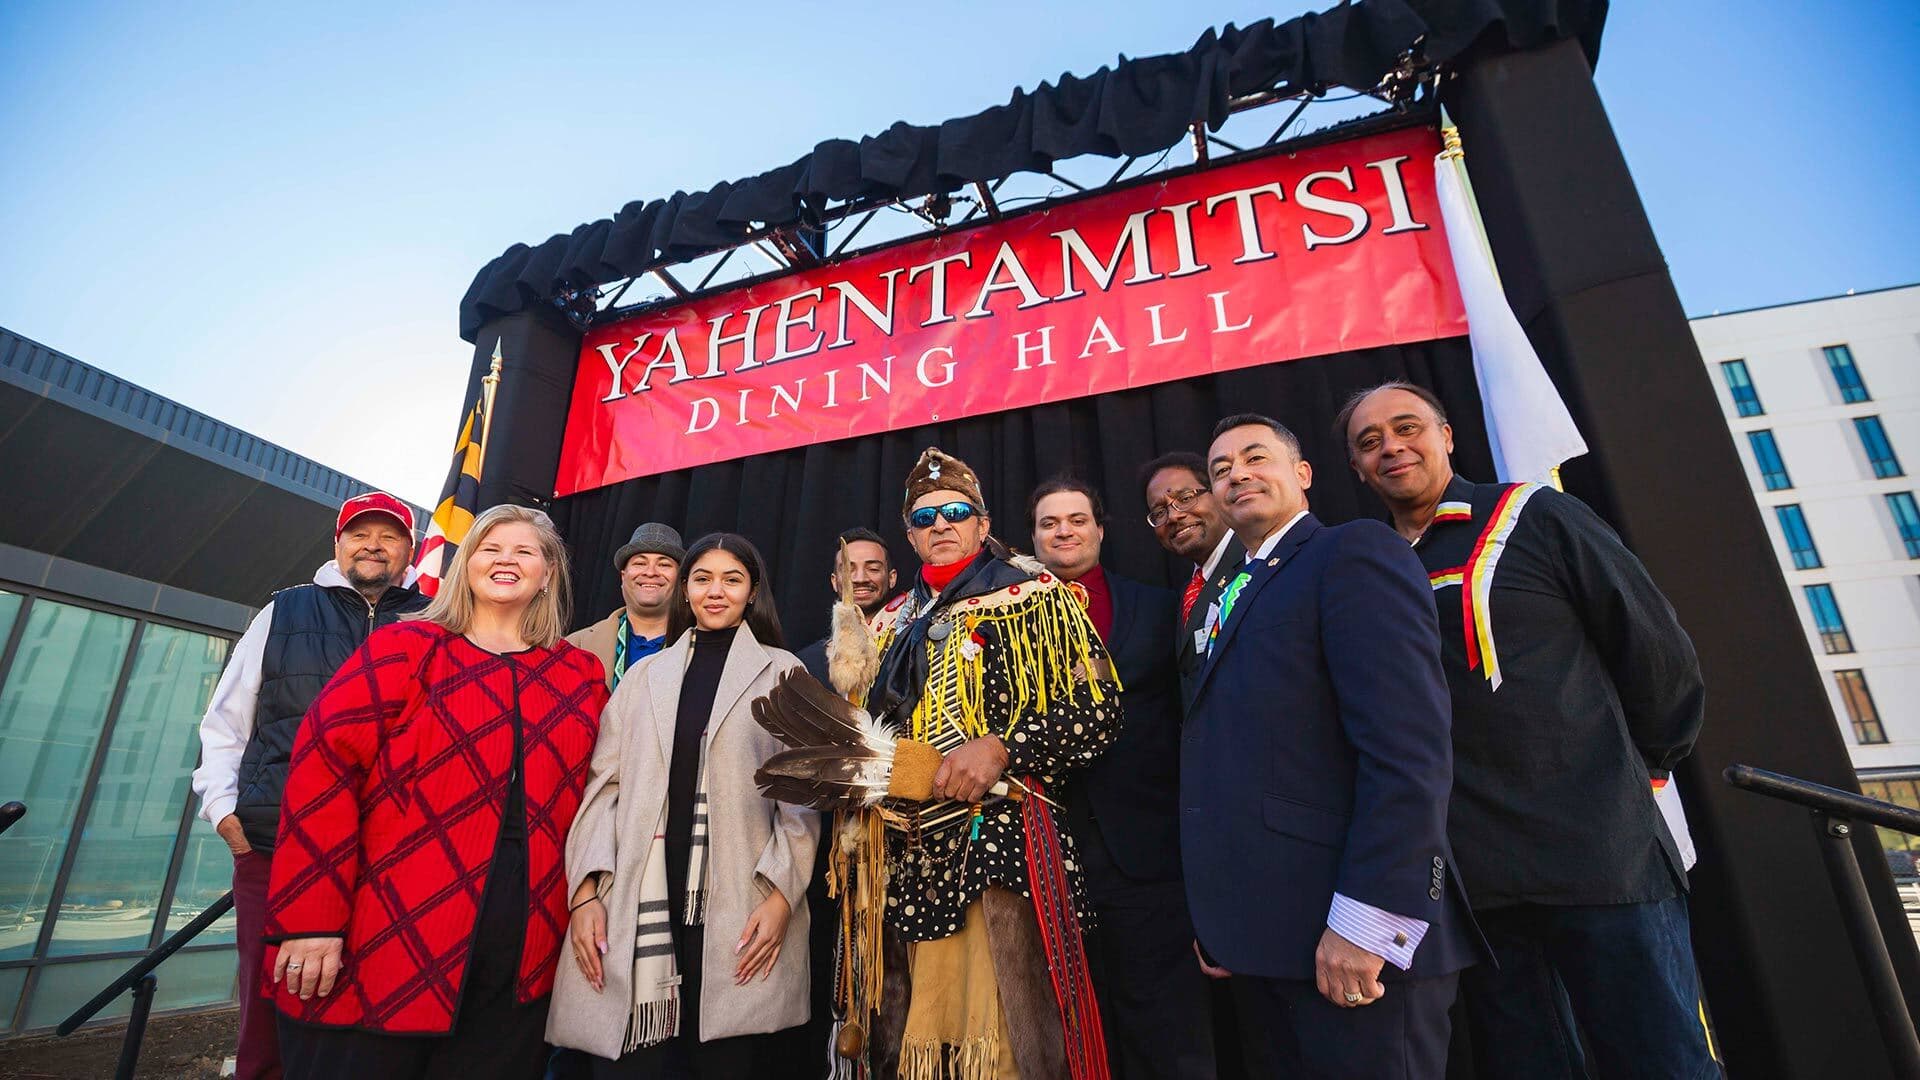 A crowd of people stand under a red banner that says "Yahentamitsi Dining Hall"